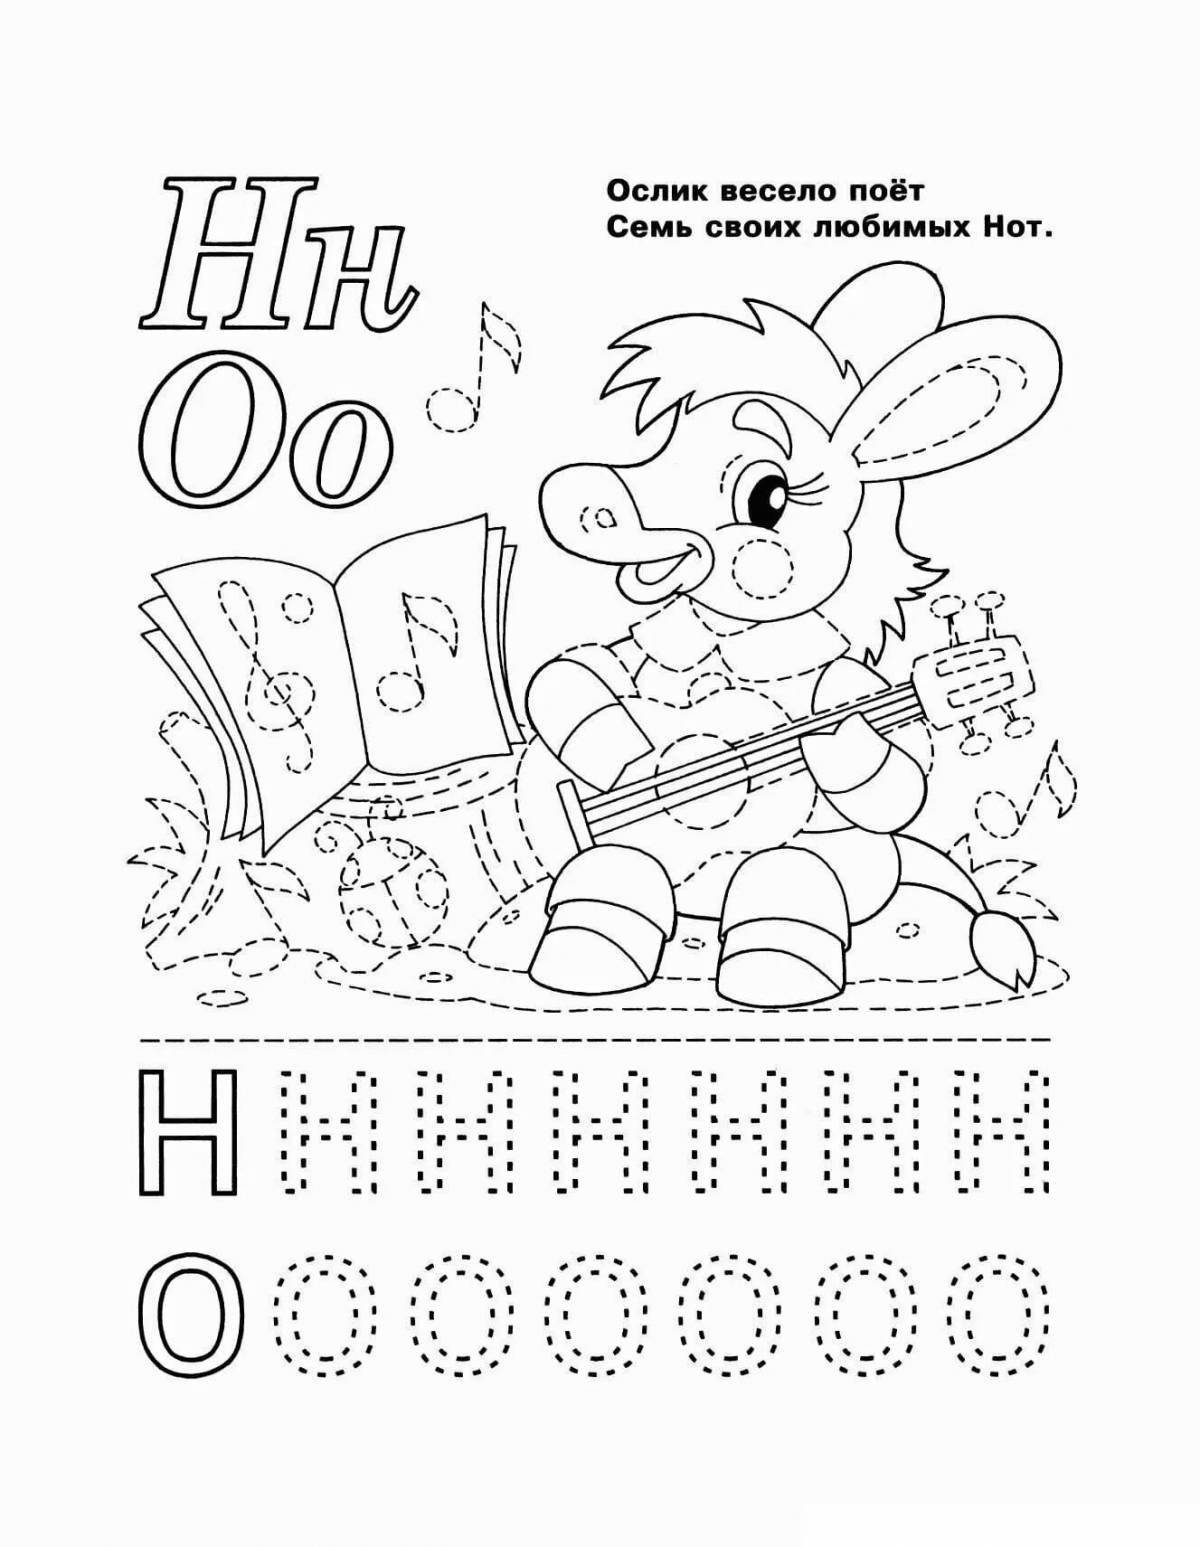 A fun alphabet coloring book for 5-6 year olds